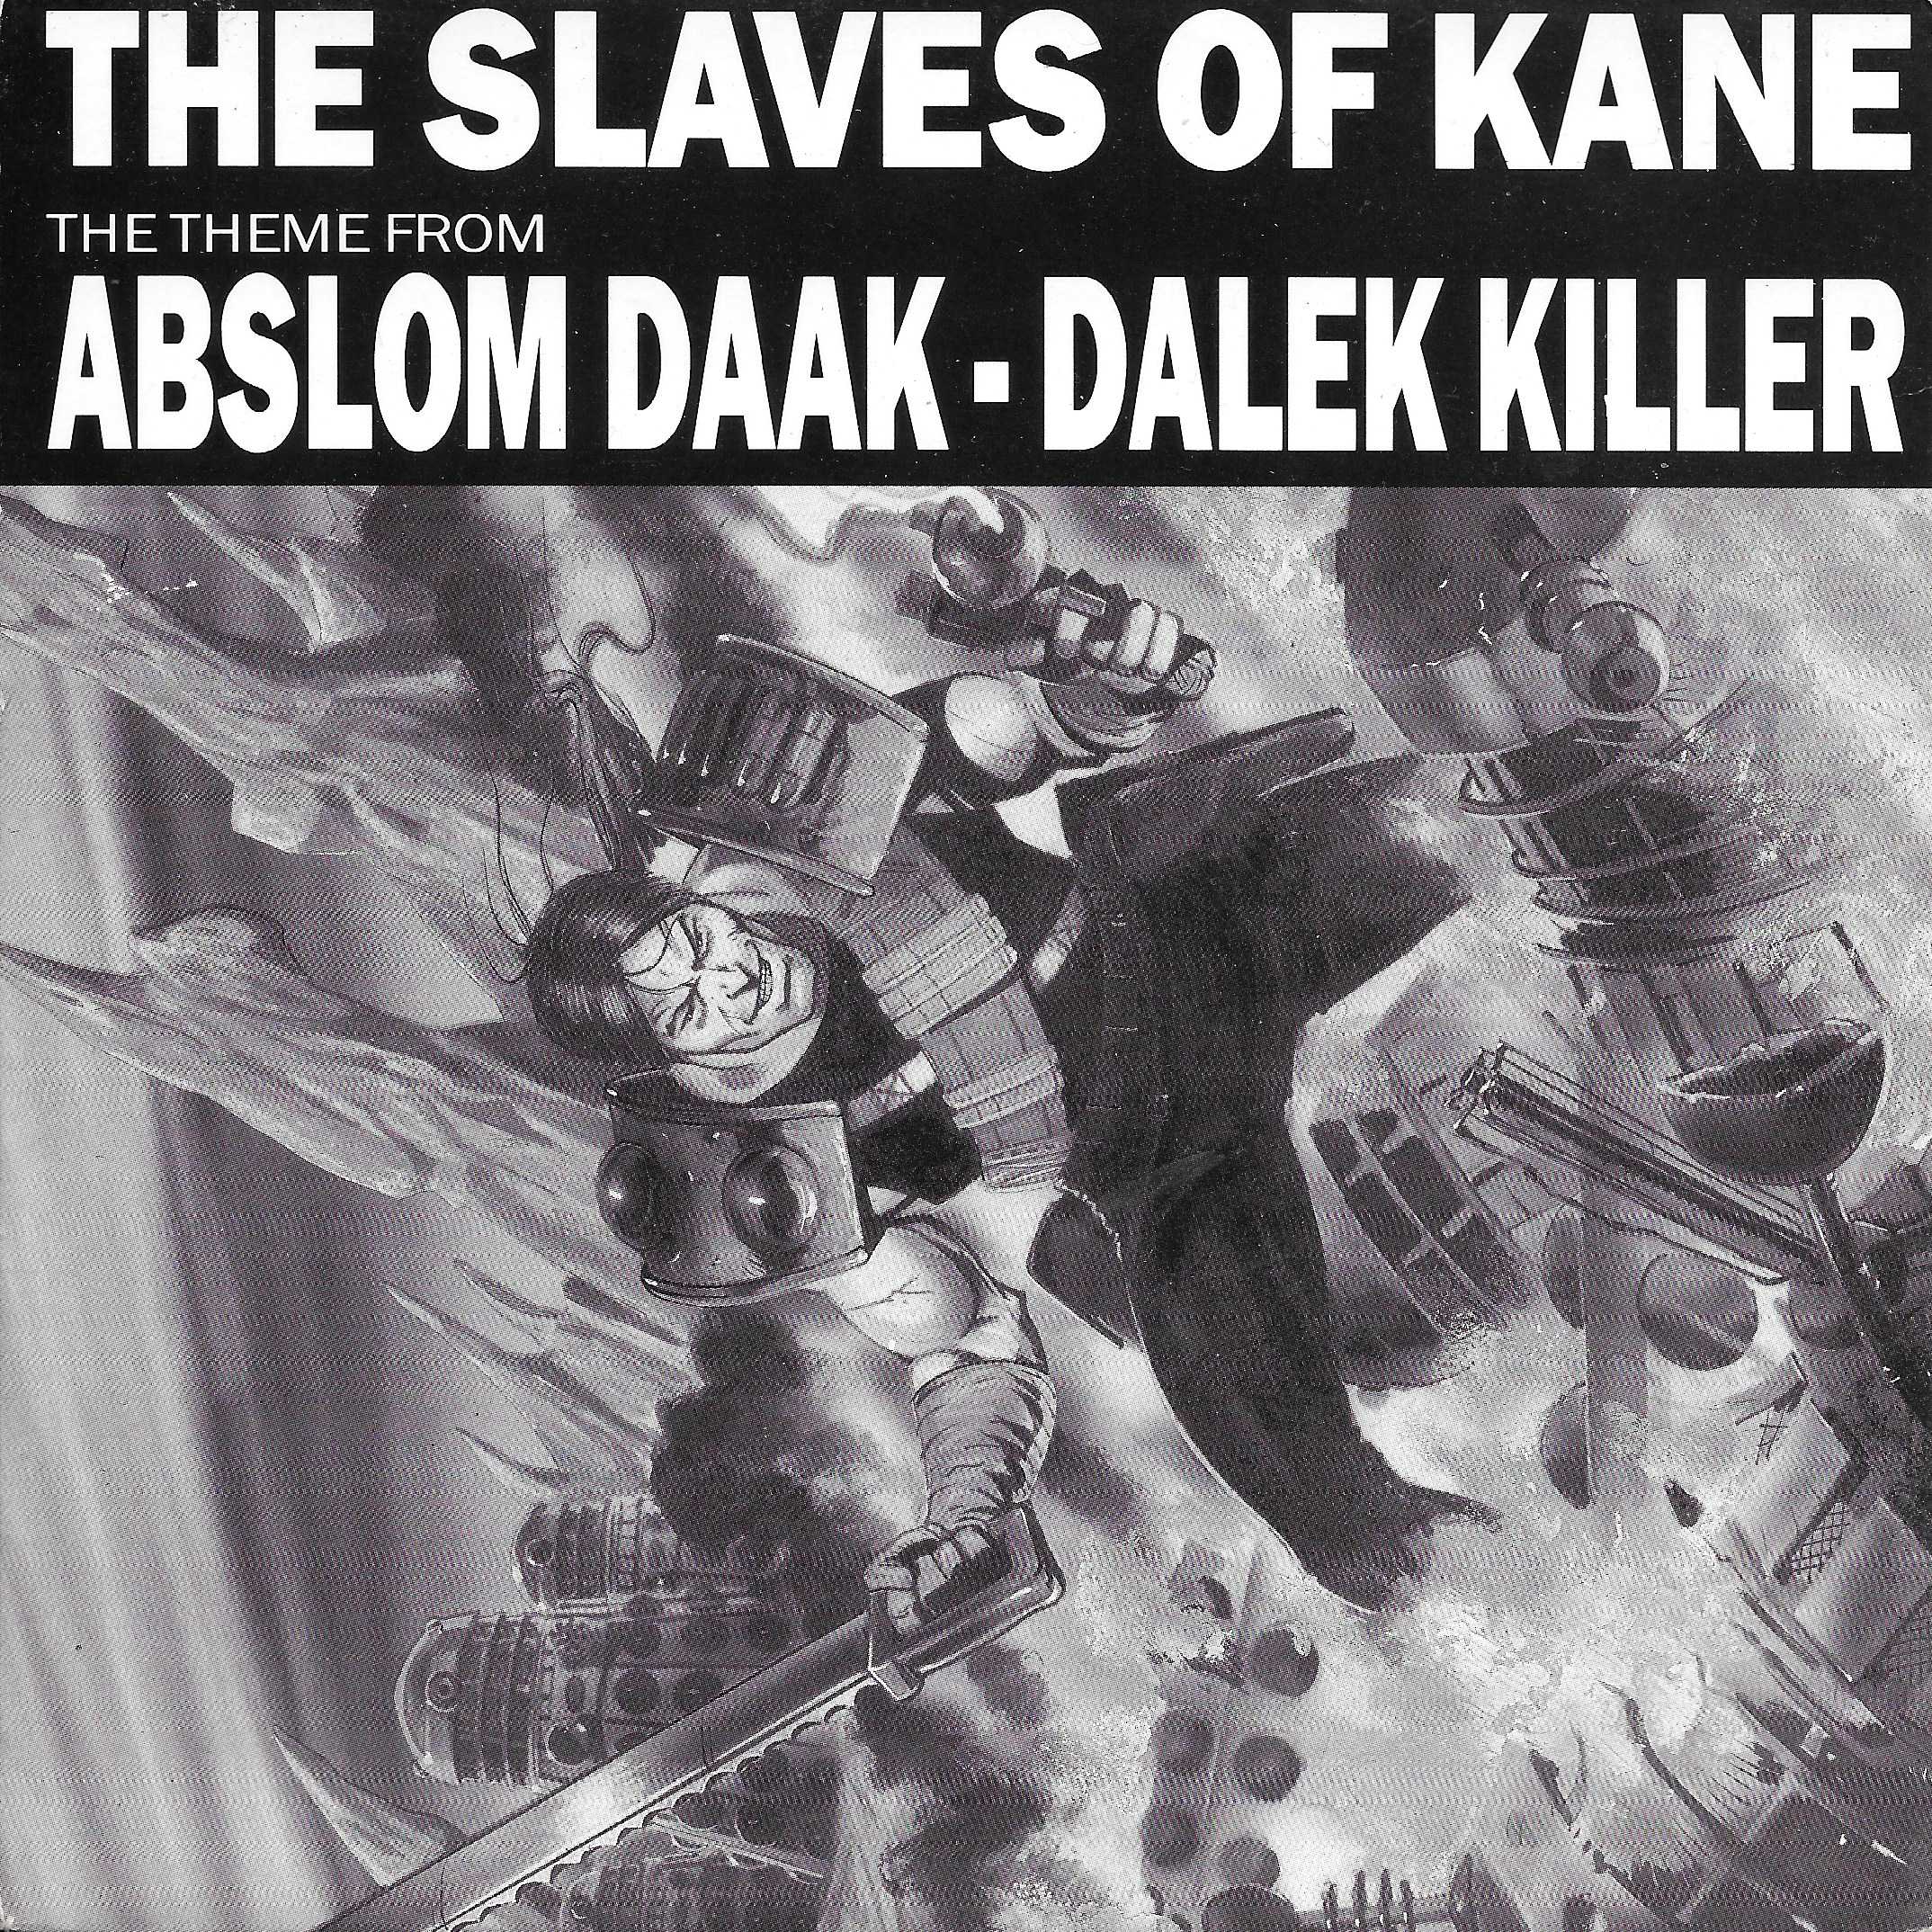 Picture of XEN - 2 The slaves of Kane (Abslom Daak - Dalek killer) by artist Dominic Glynn from the BBC singles - Records and Tapes library